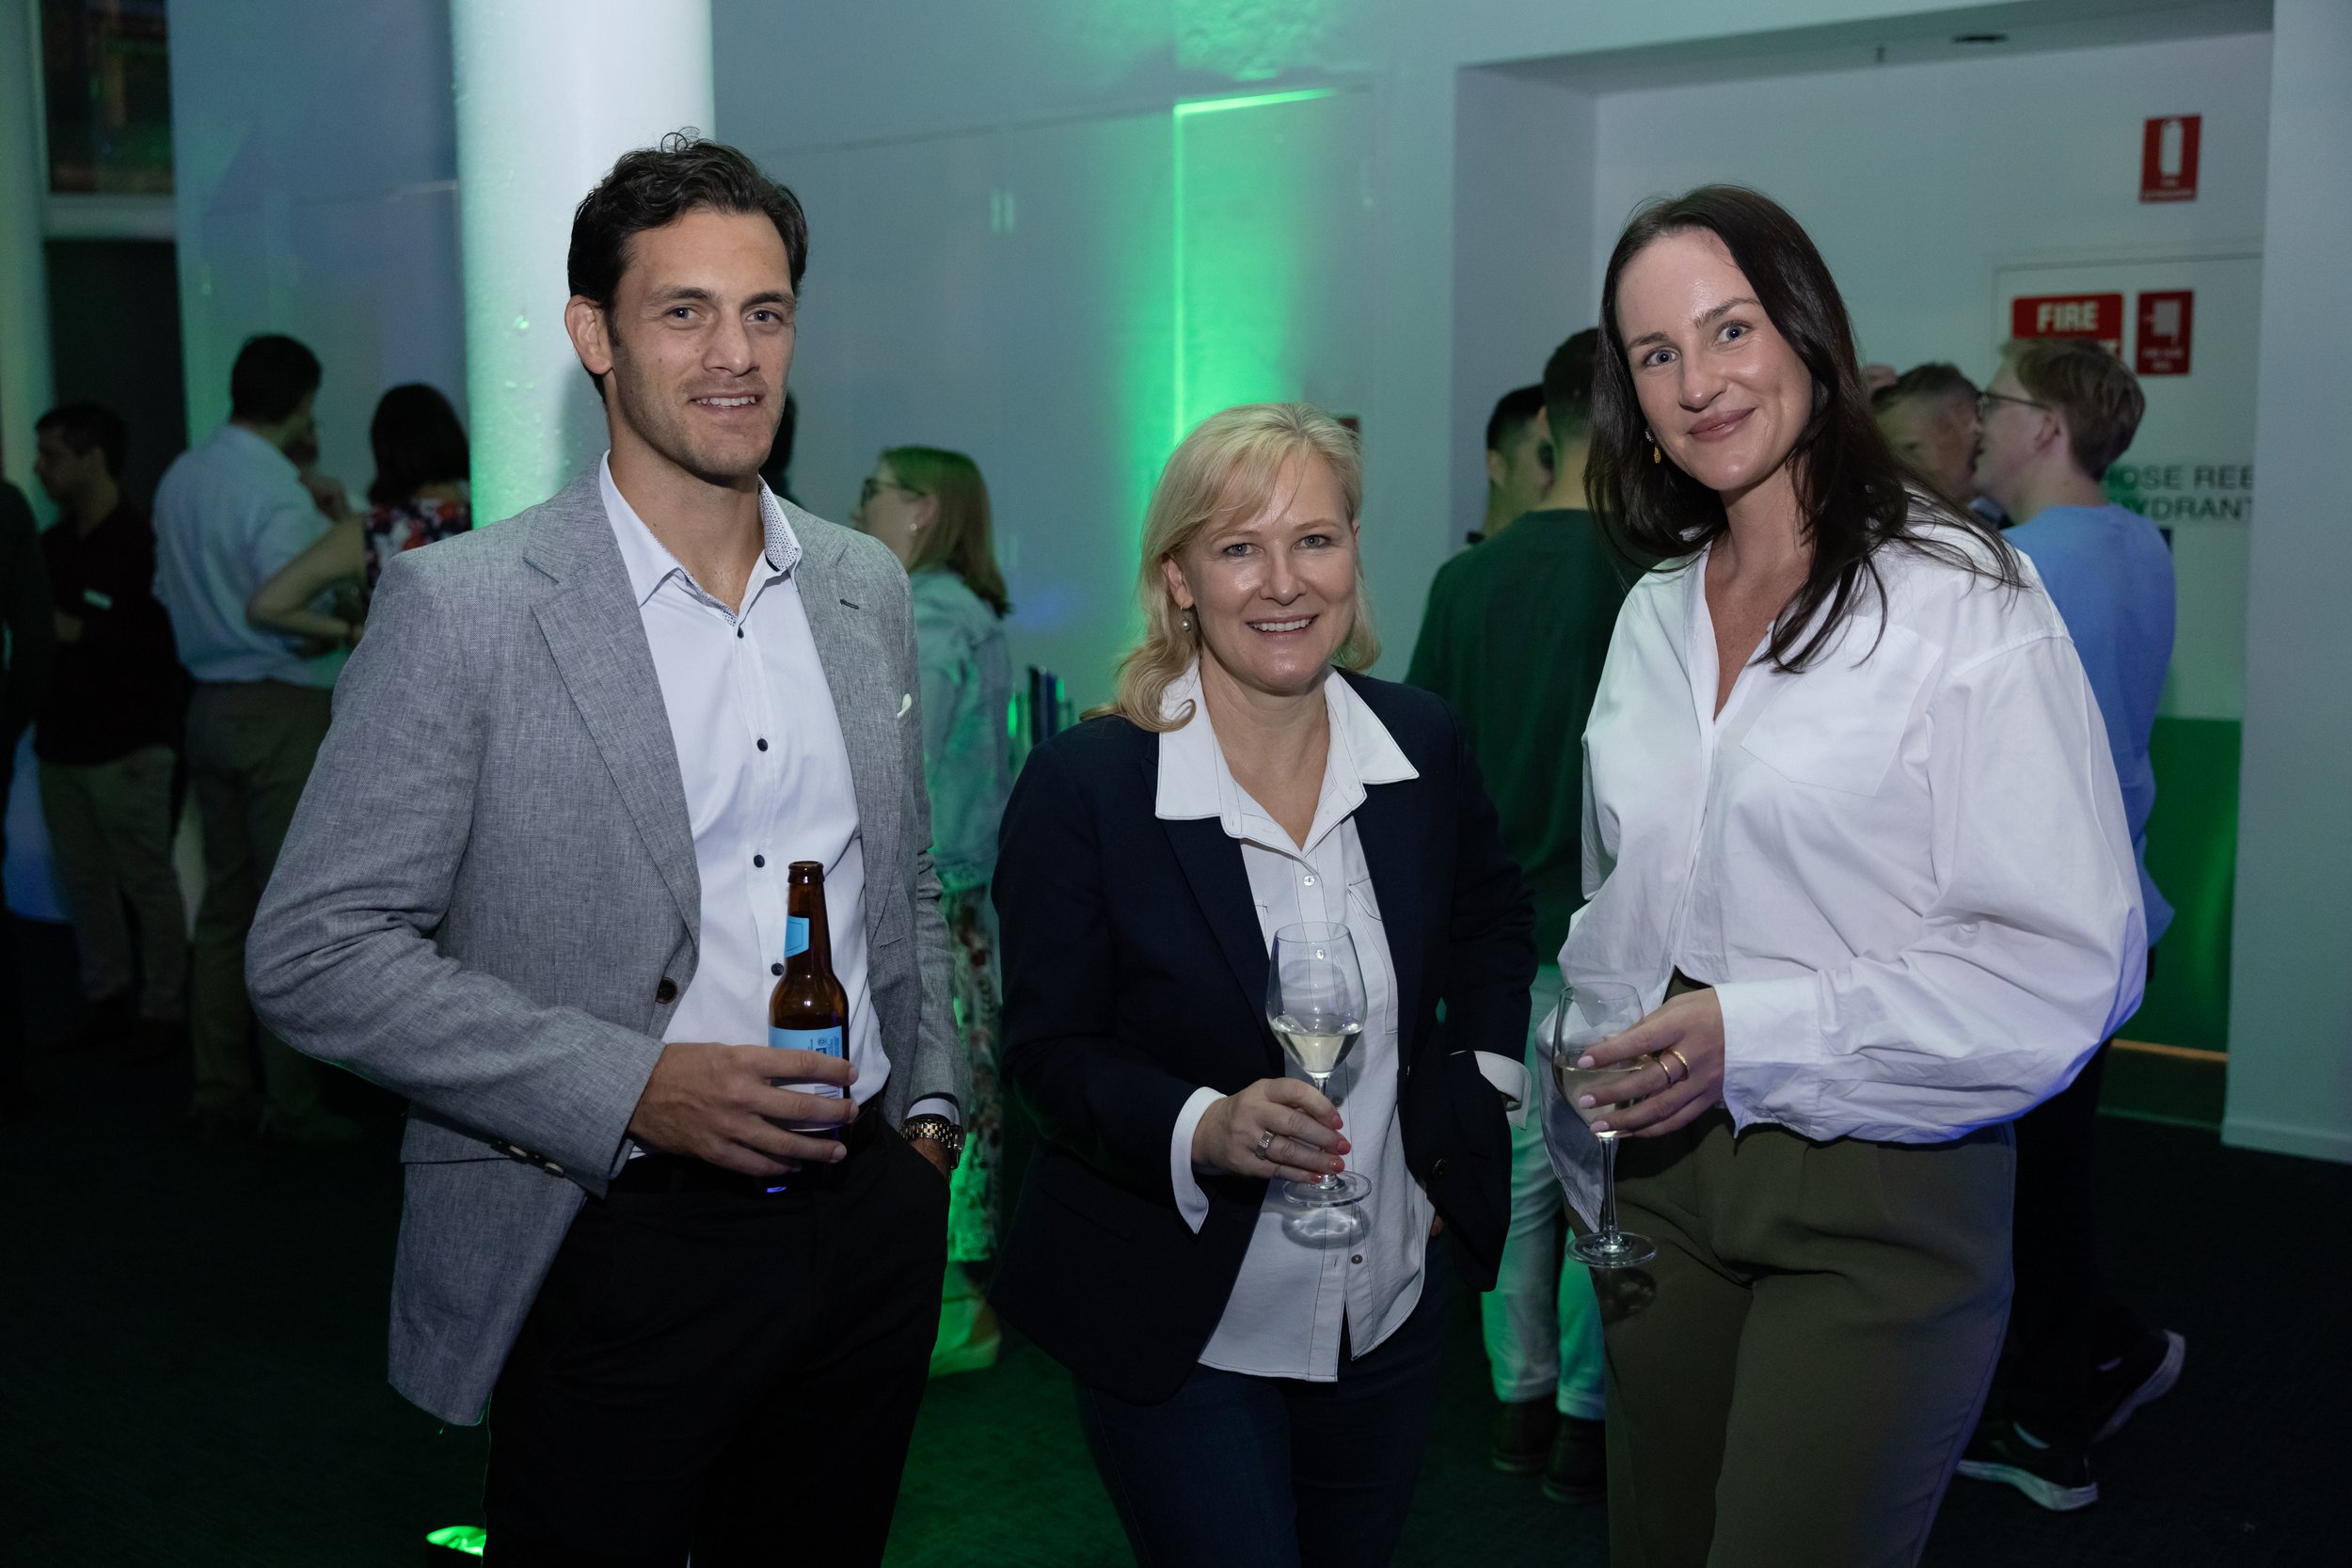 Green Energy Trading 10 years cocktail party-56.jpg